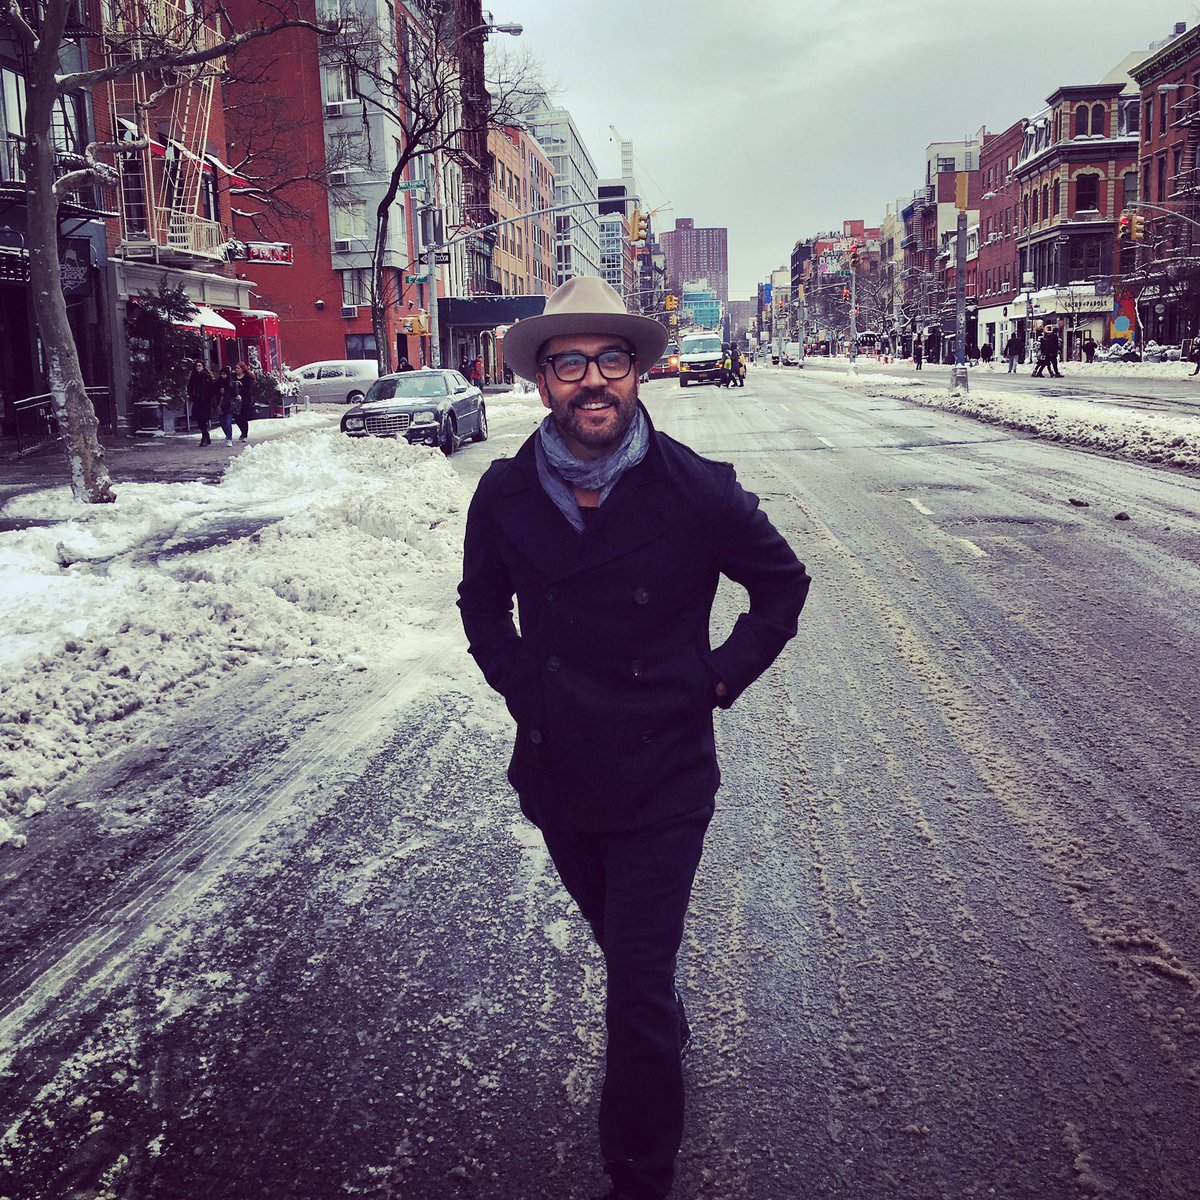 Freezing my balls off on the mean streets of #NYC https://t.co/fDThdeW9OZ